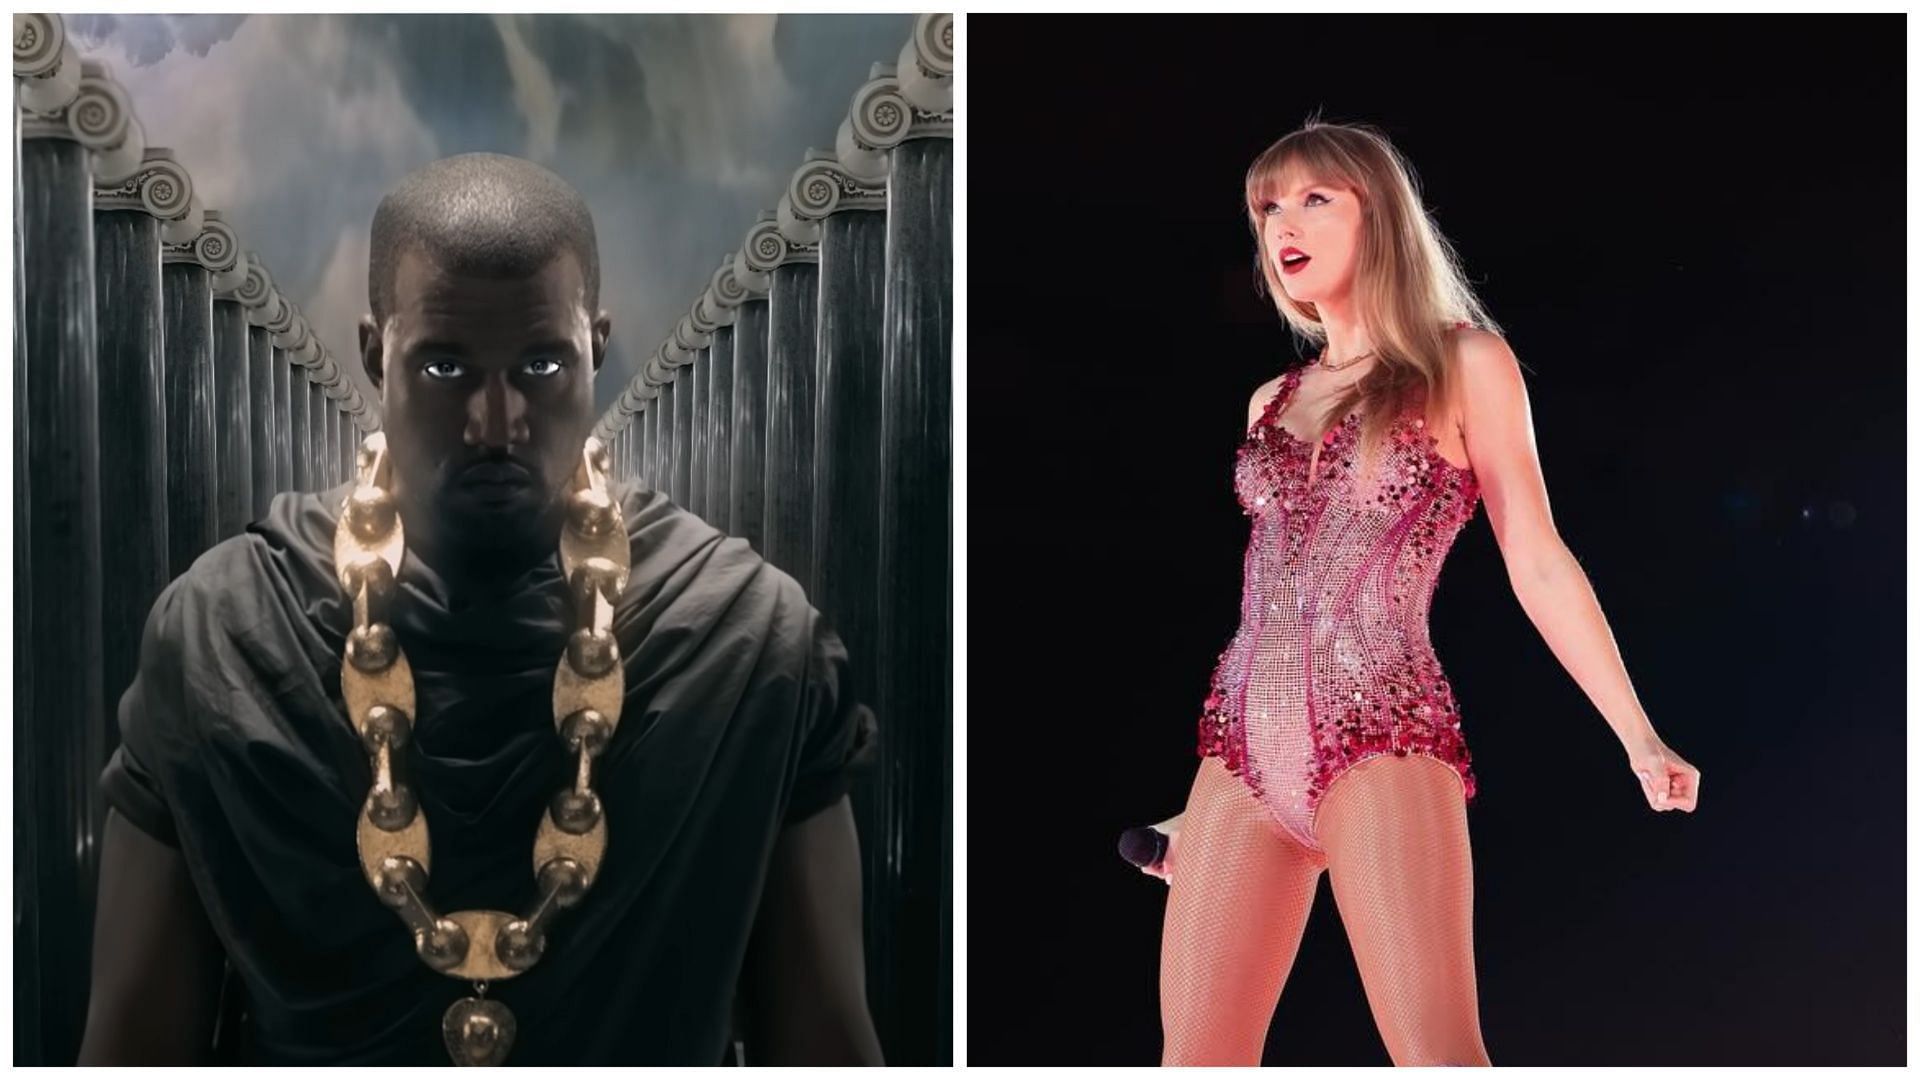 Kanye West had a lot to say to Swifties on Instagram (Image via YouTube/Kanye West, Instagram/@taylorswift)